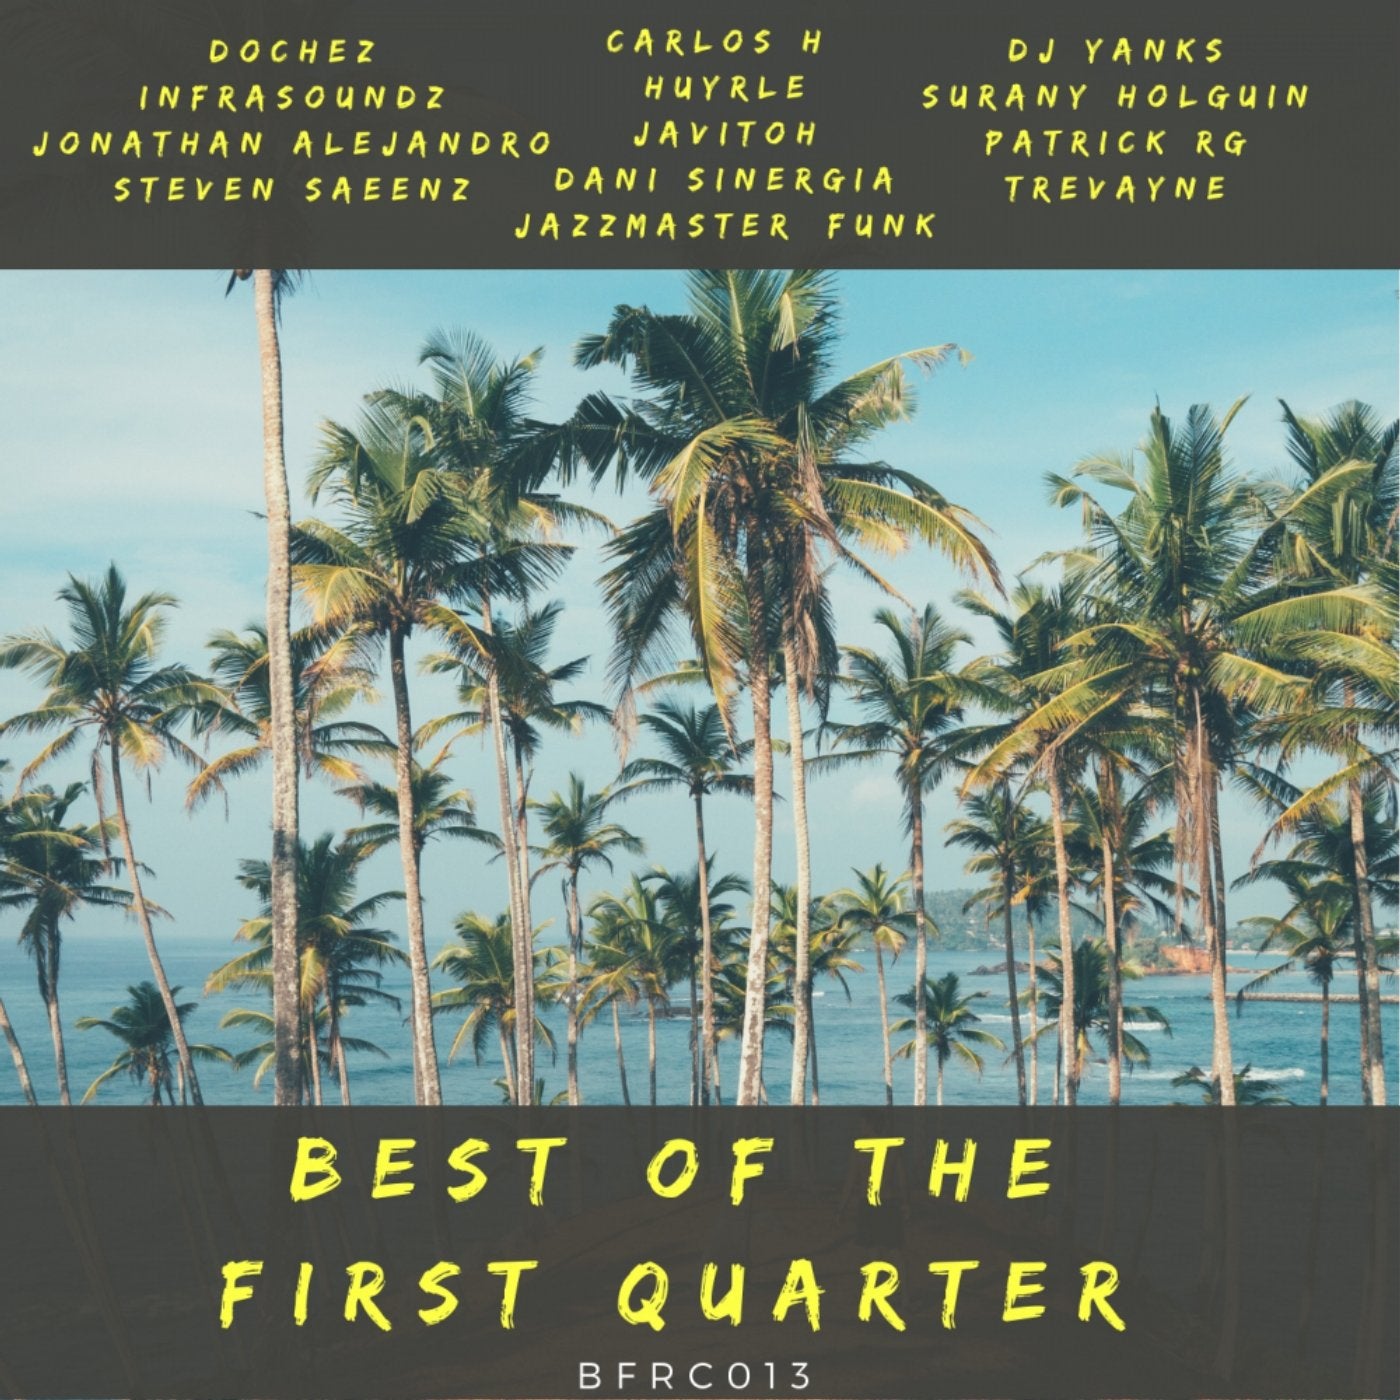 Best of The First Quarter